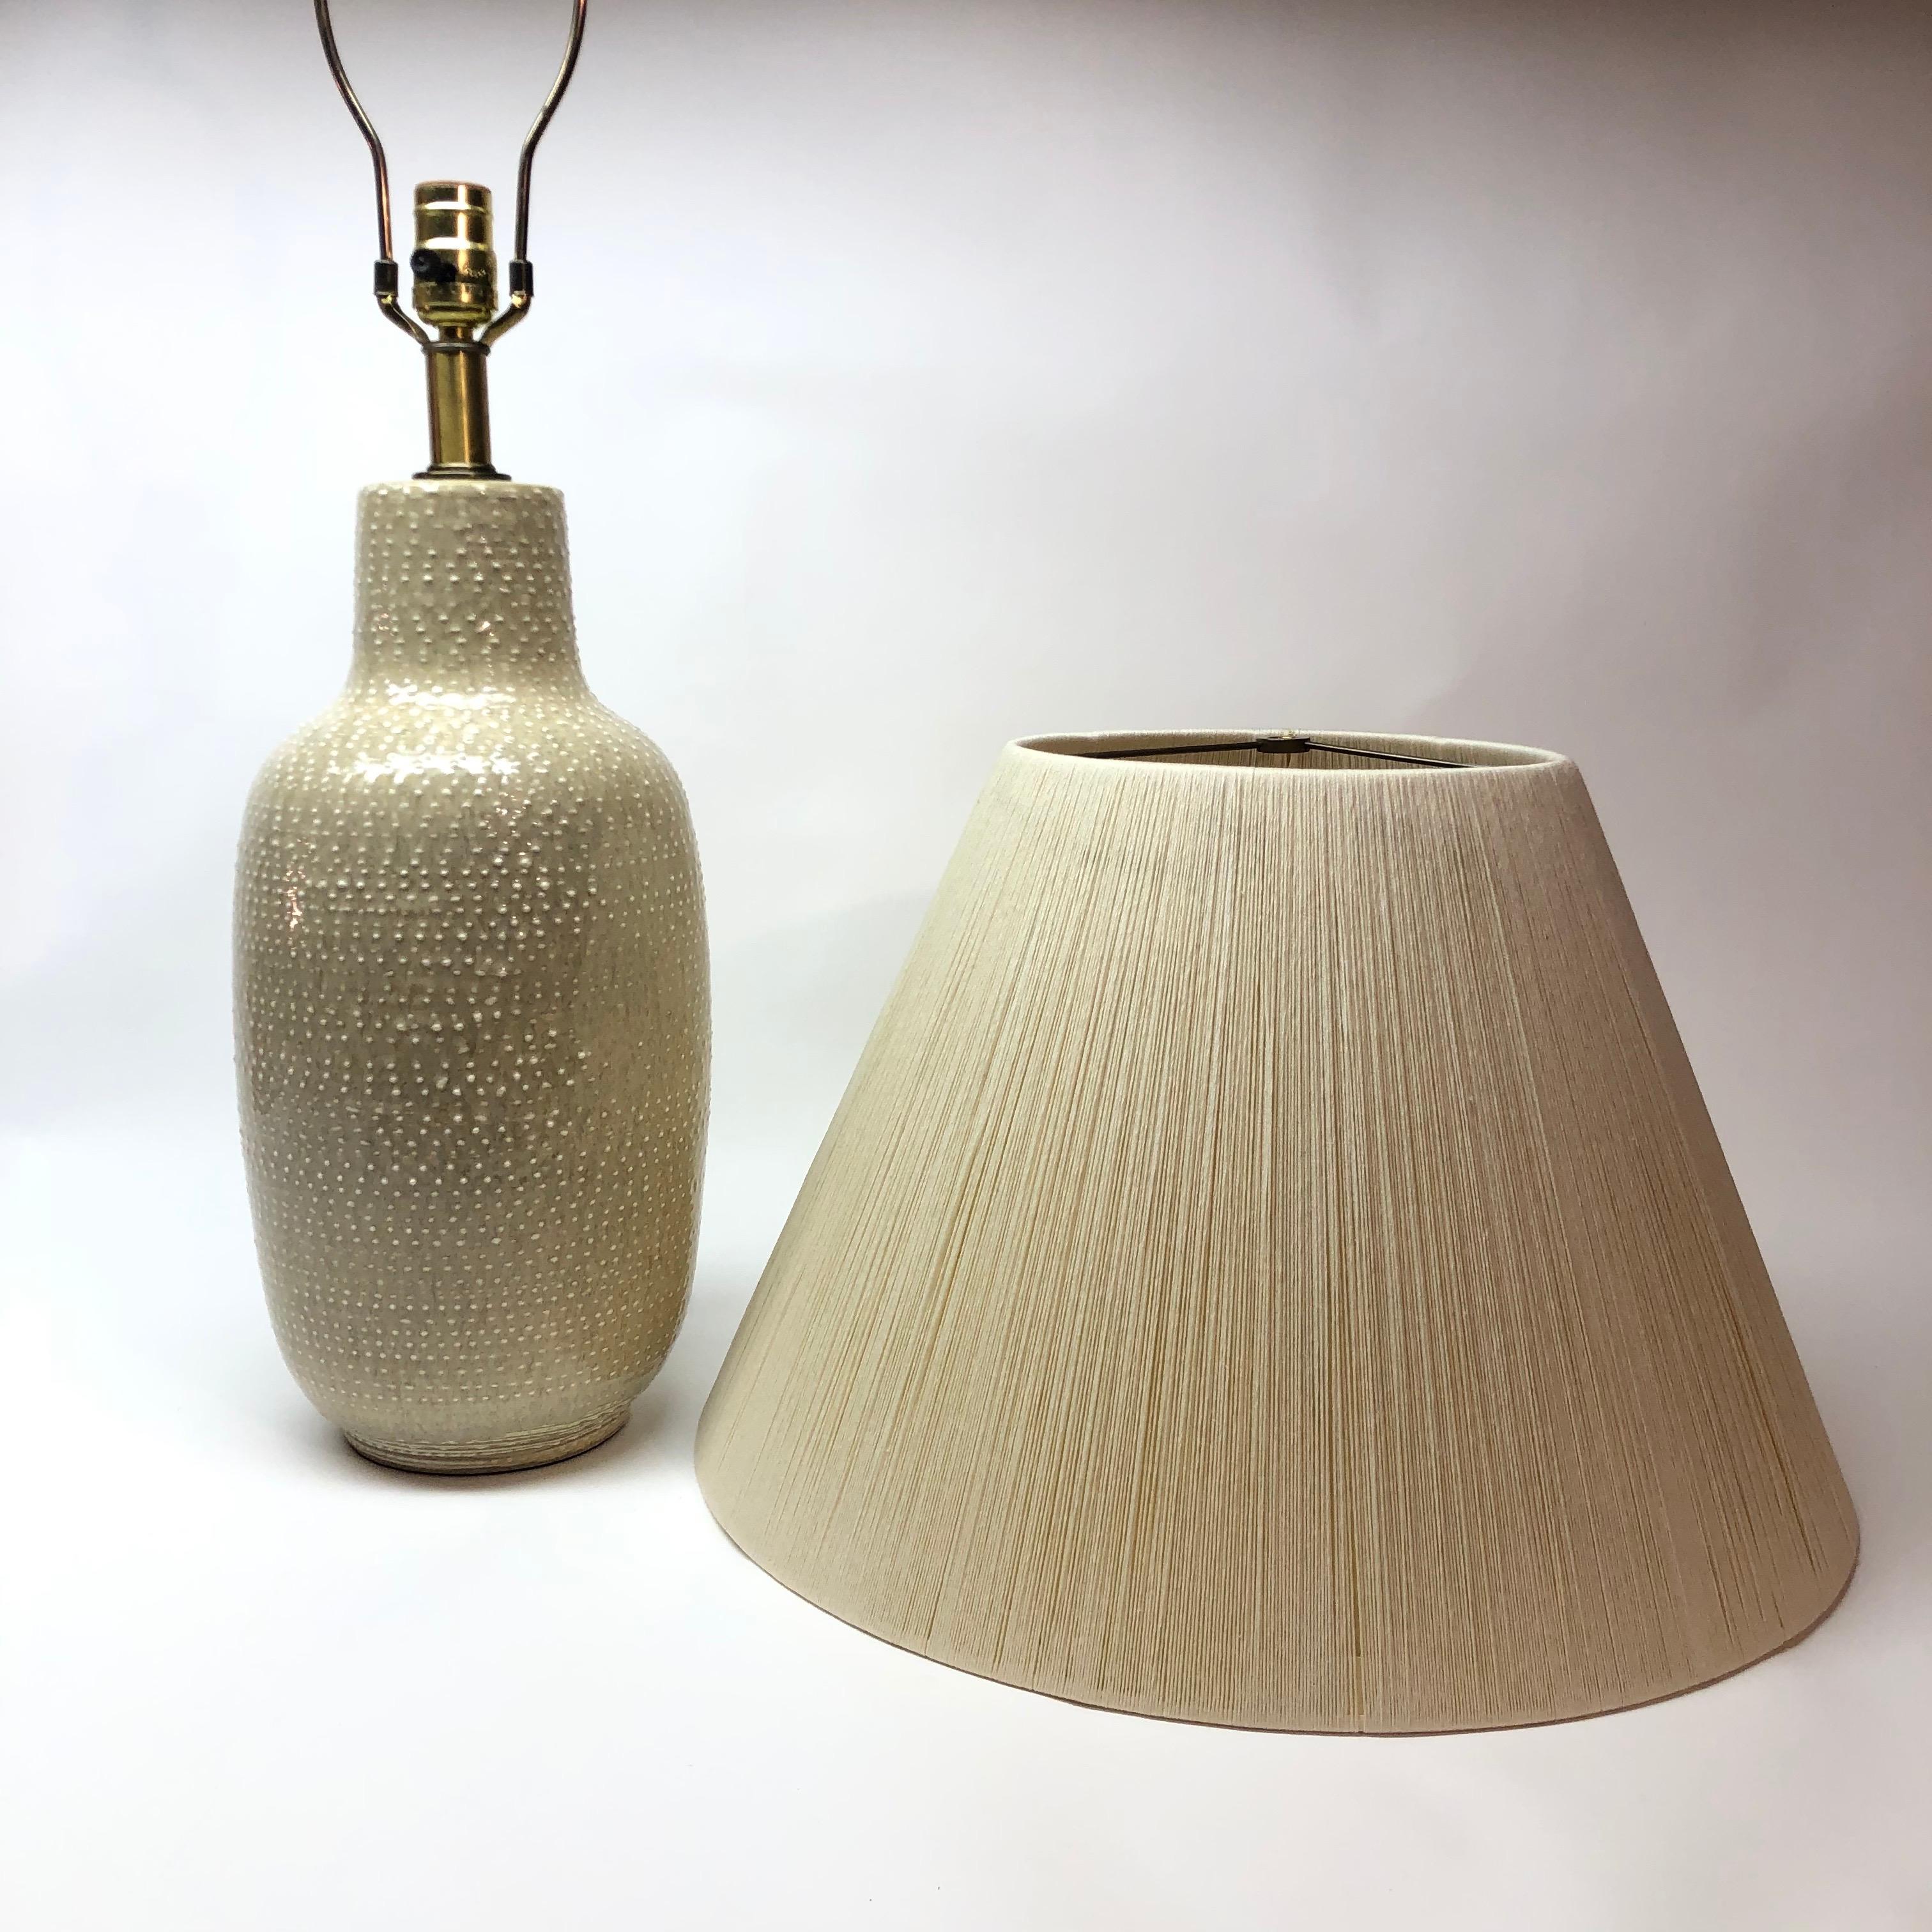 Art pottery ceramic table lamp... shade not included.

Measures: Lamp base 29.75